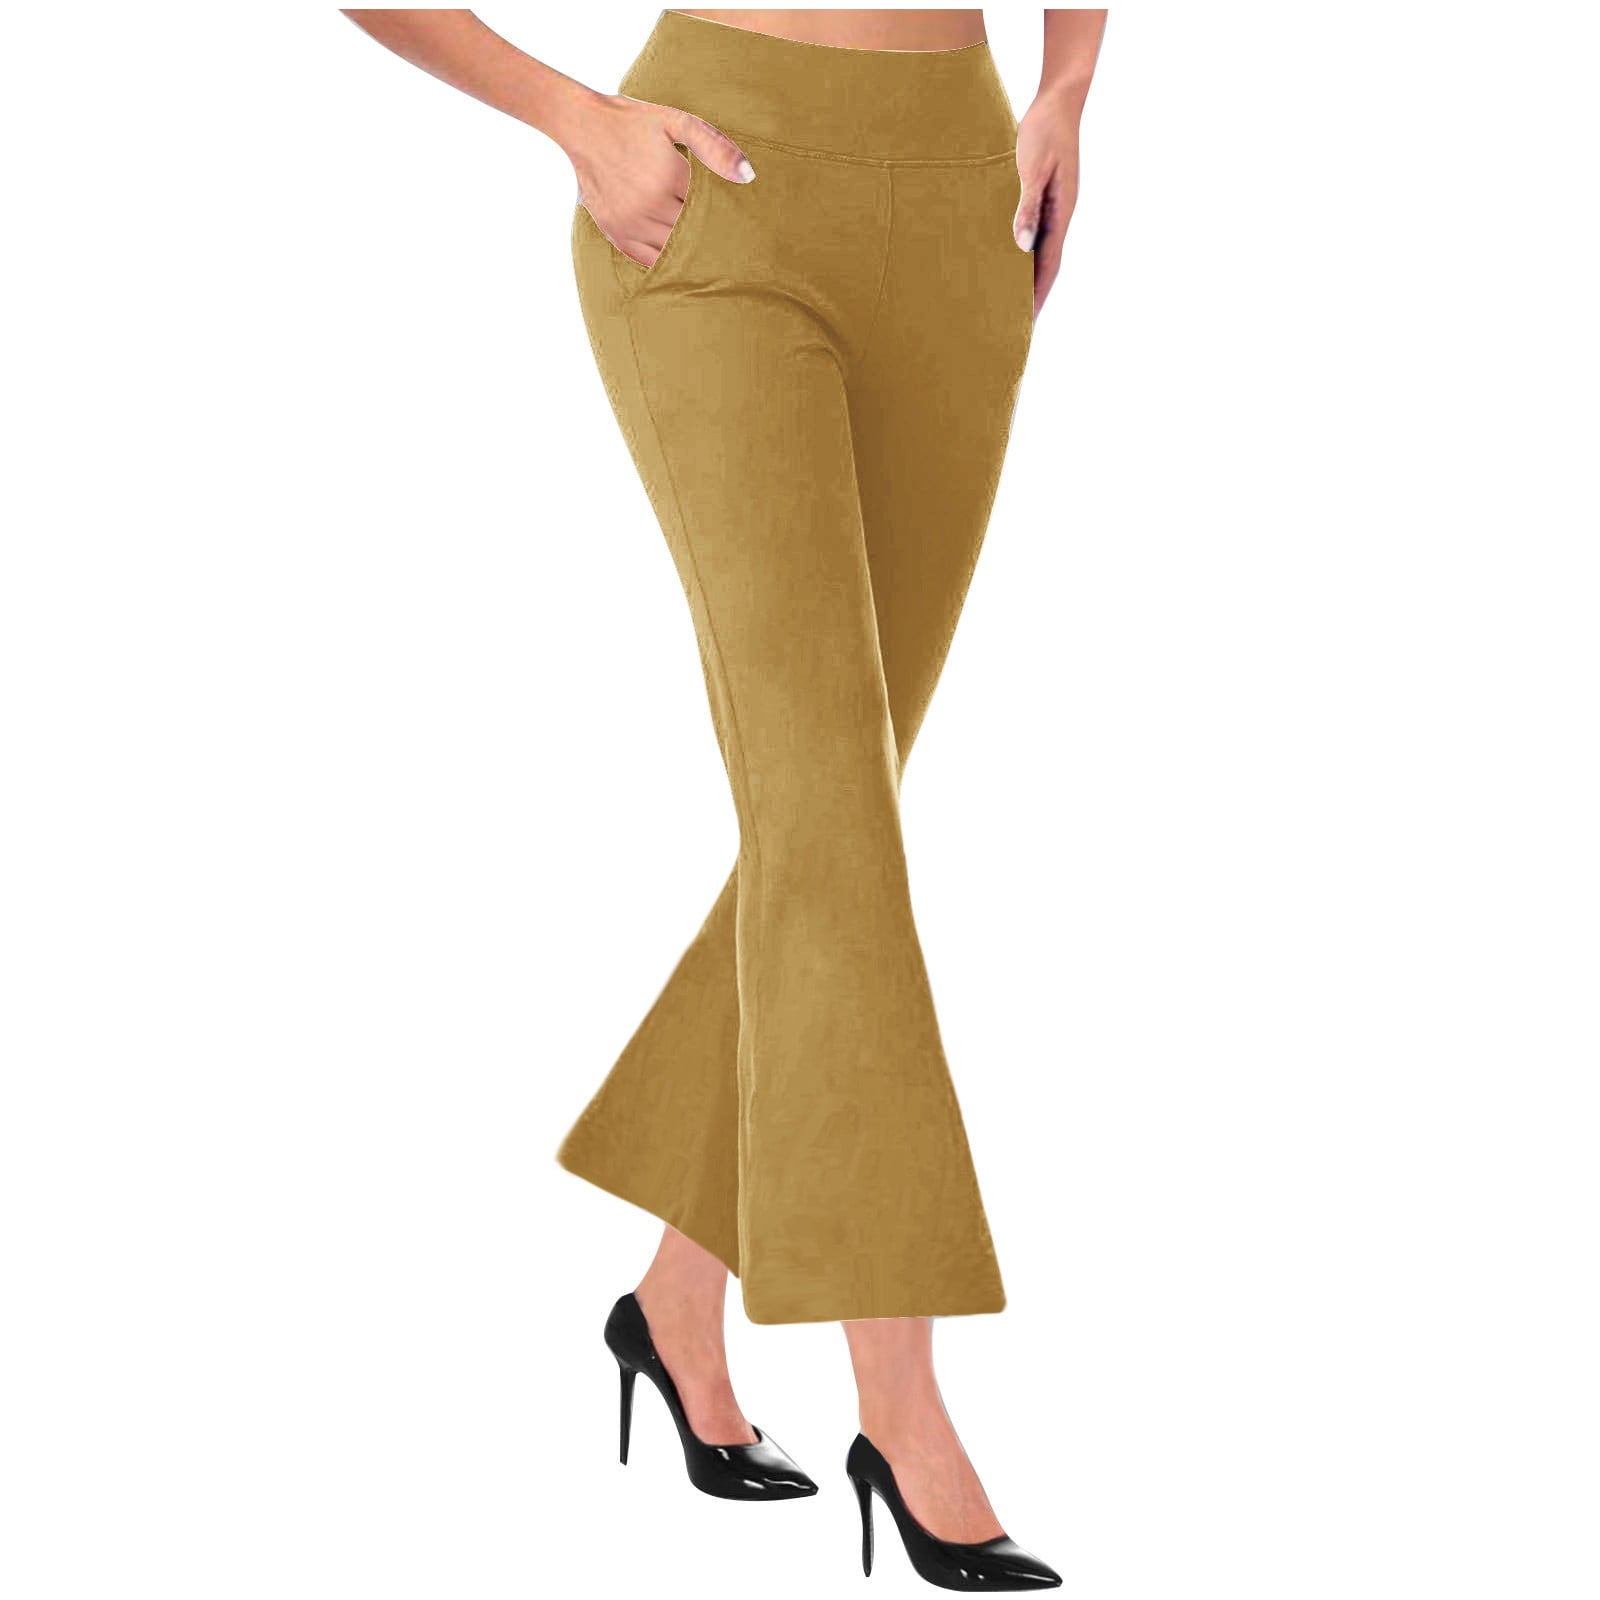 XFLWAM Women High Waisted Inseam Front Stretchy Slimming Flare Leg